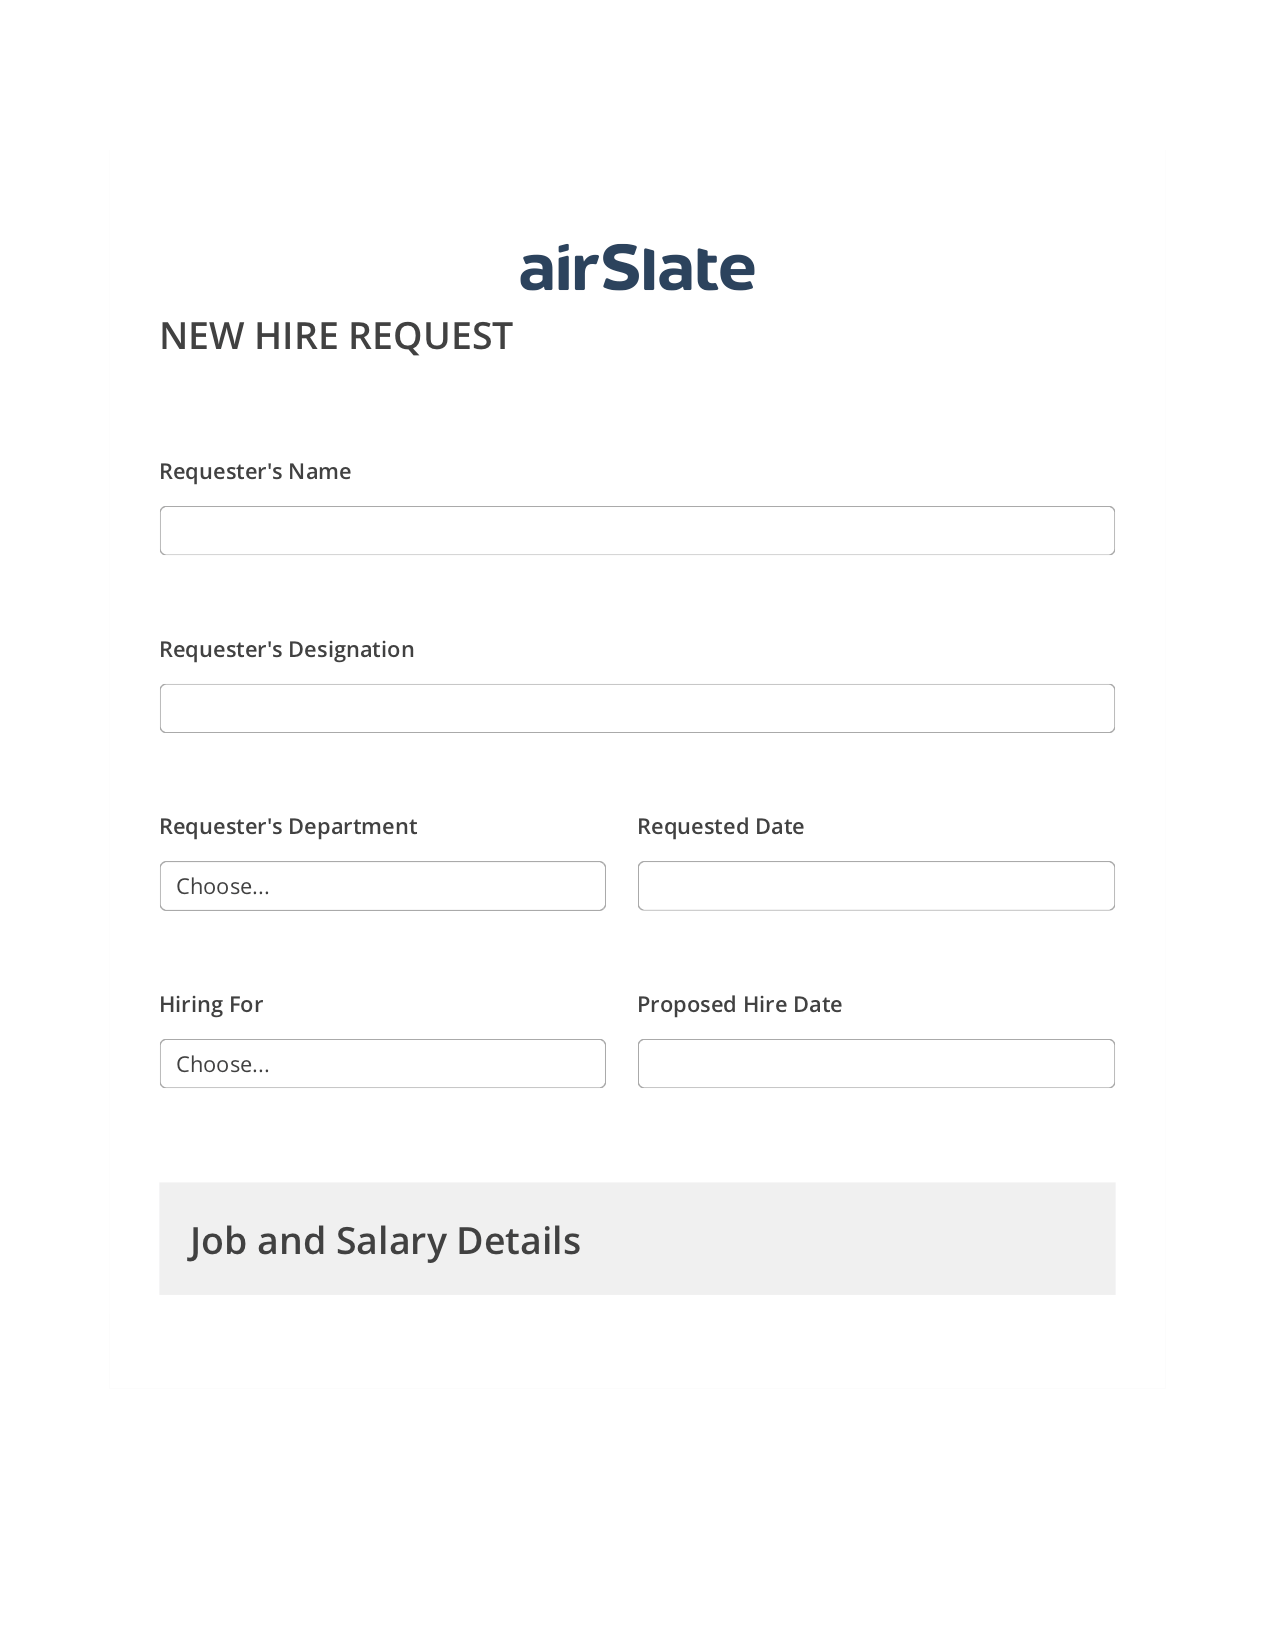 Hiring Request Workflow Pre-fill from another Slate Bot, Add Tags to Slate Bot, Export to Google Sheet Bot